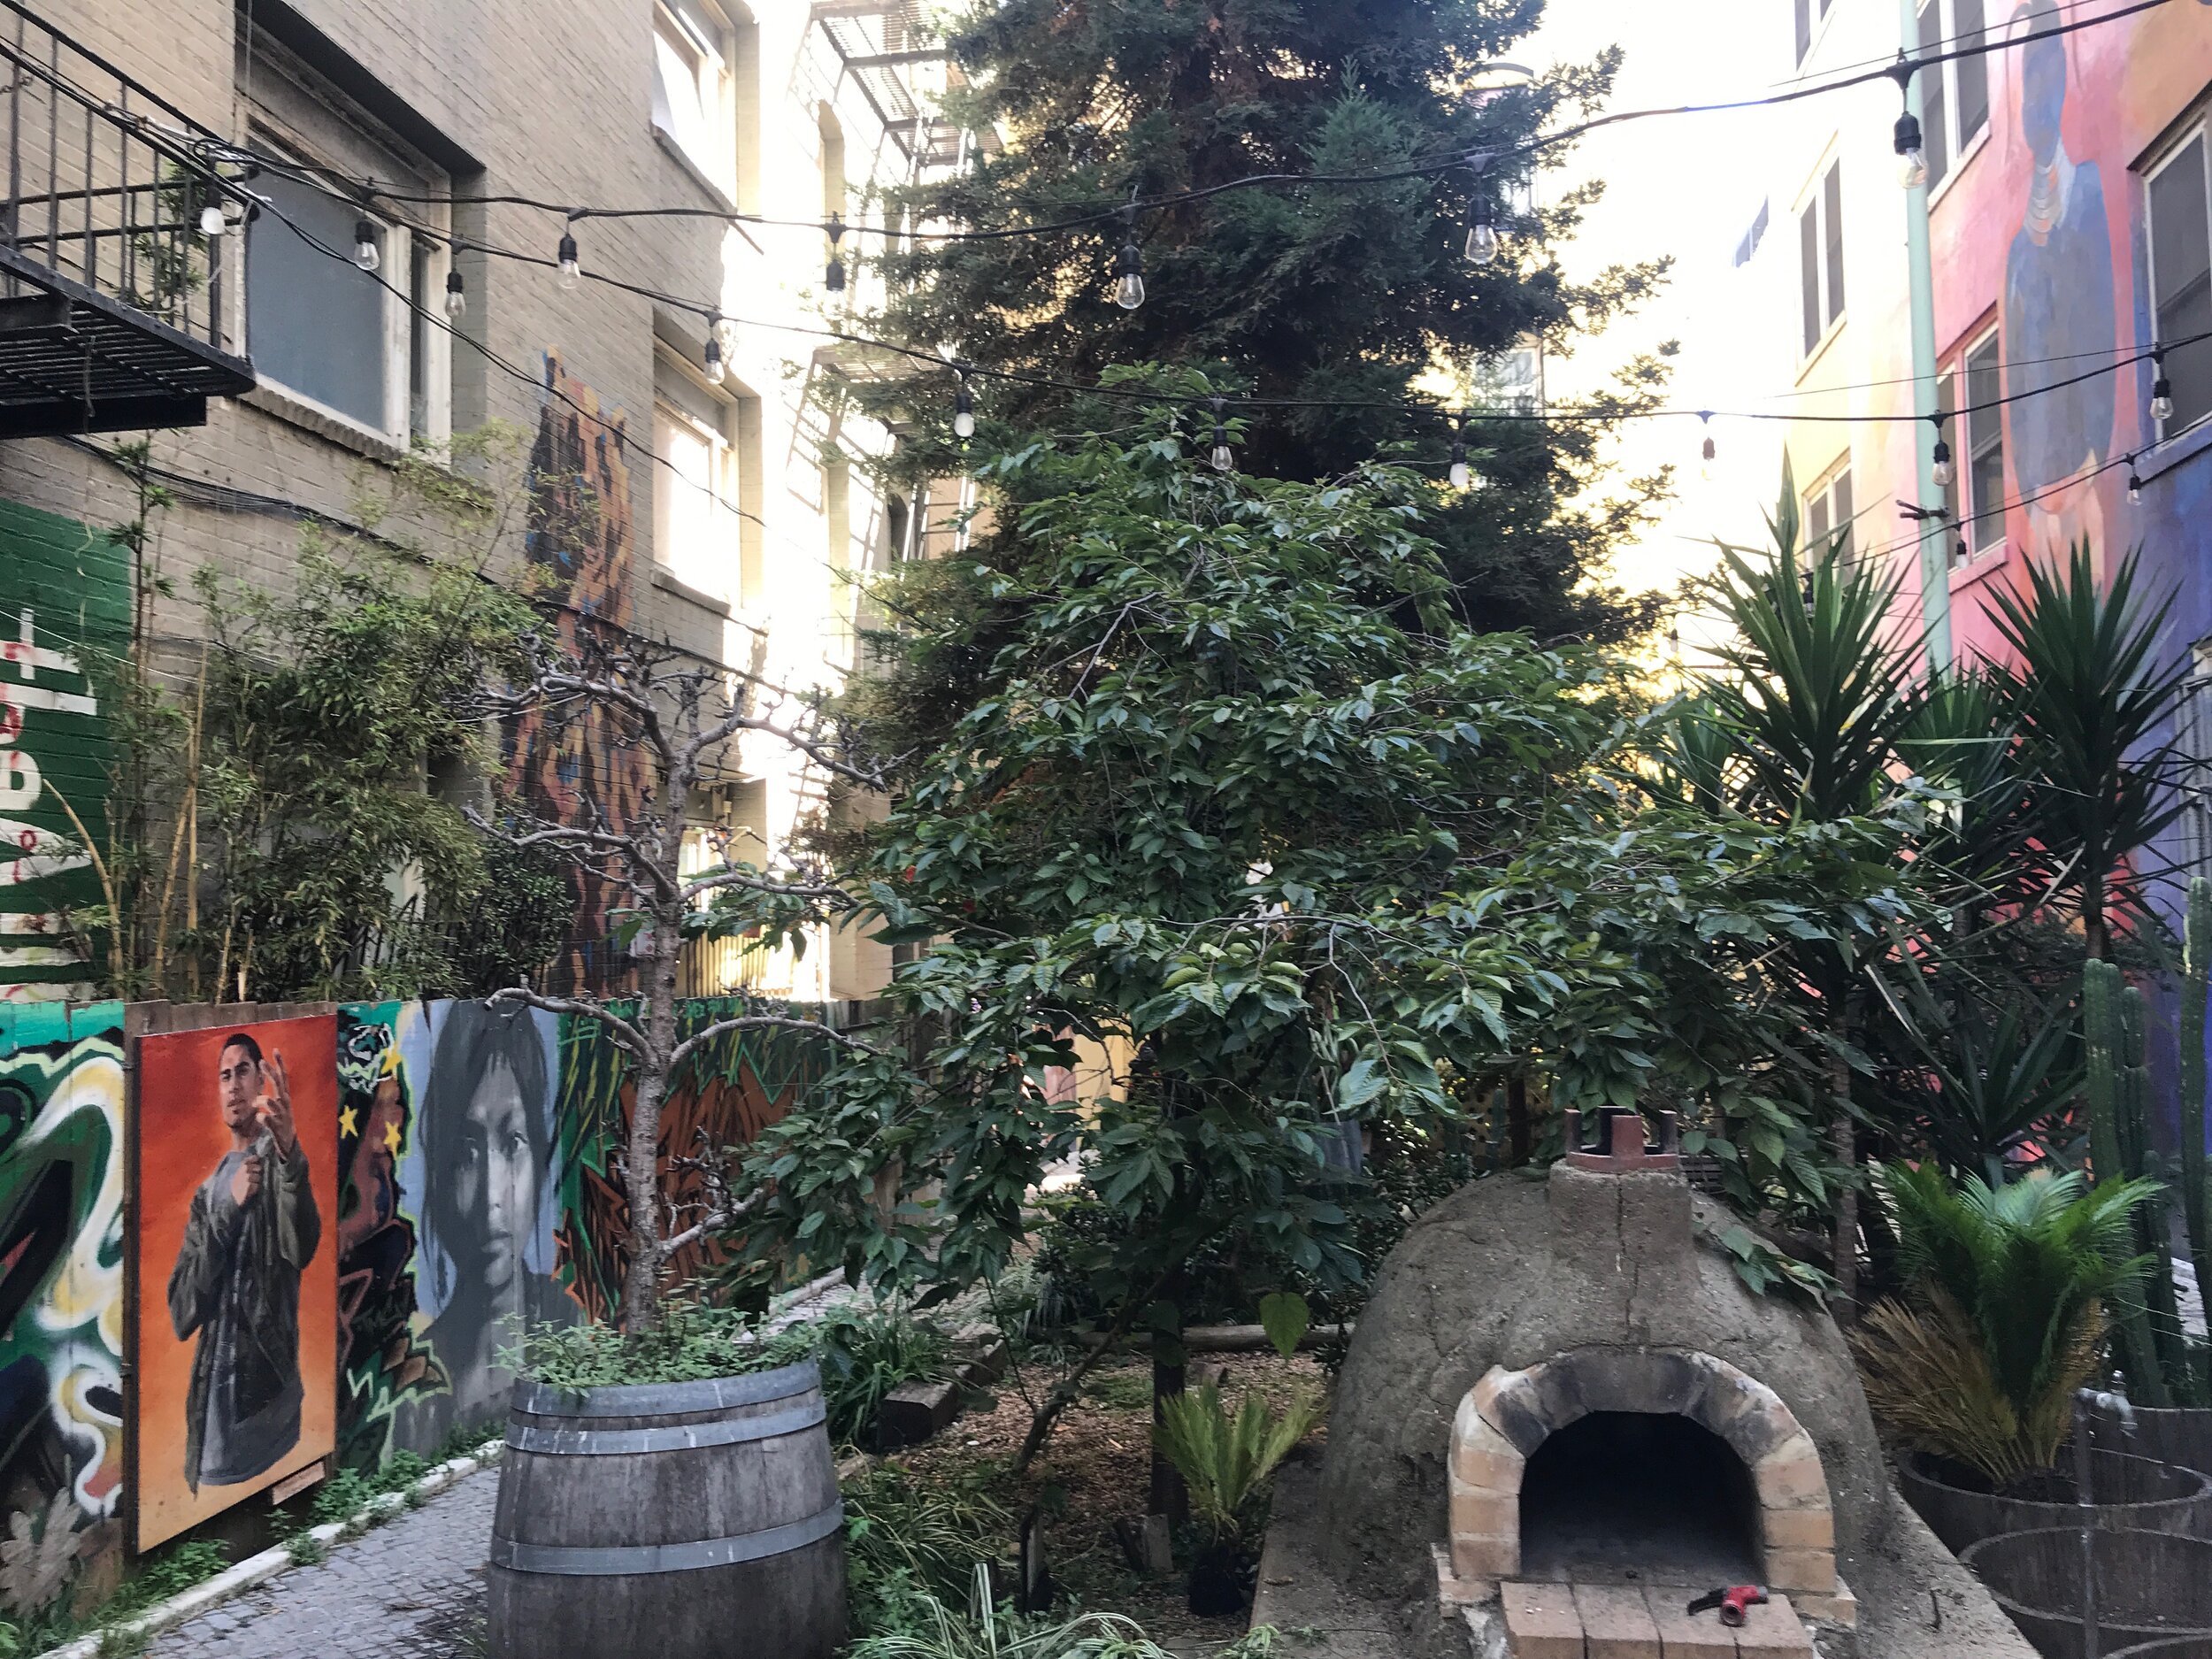  A vacant lot has recently been planted by community organizations and is now known as the “Tenderloin National Forest.” 